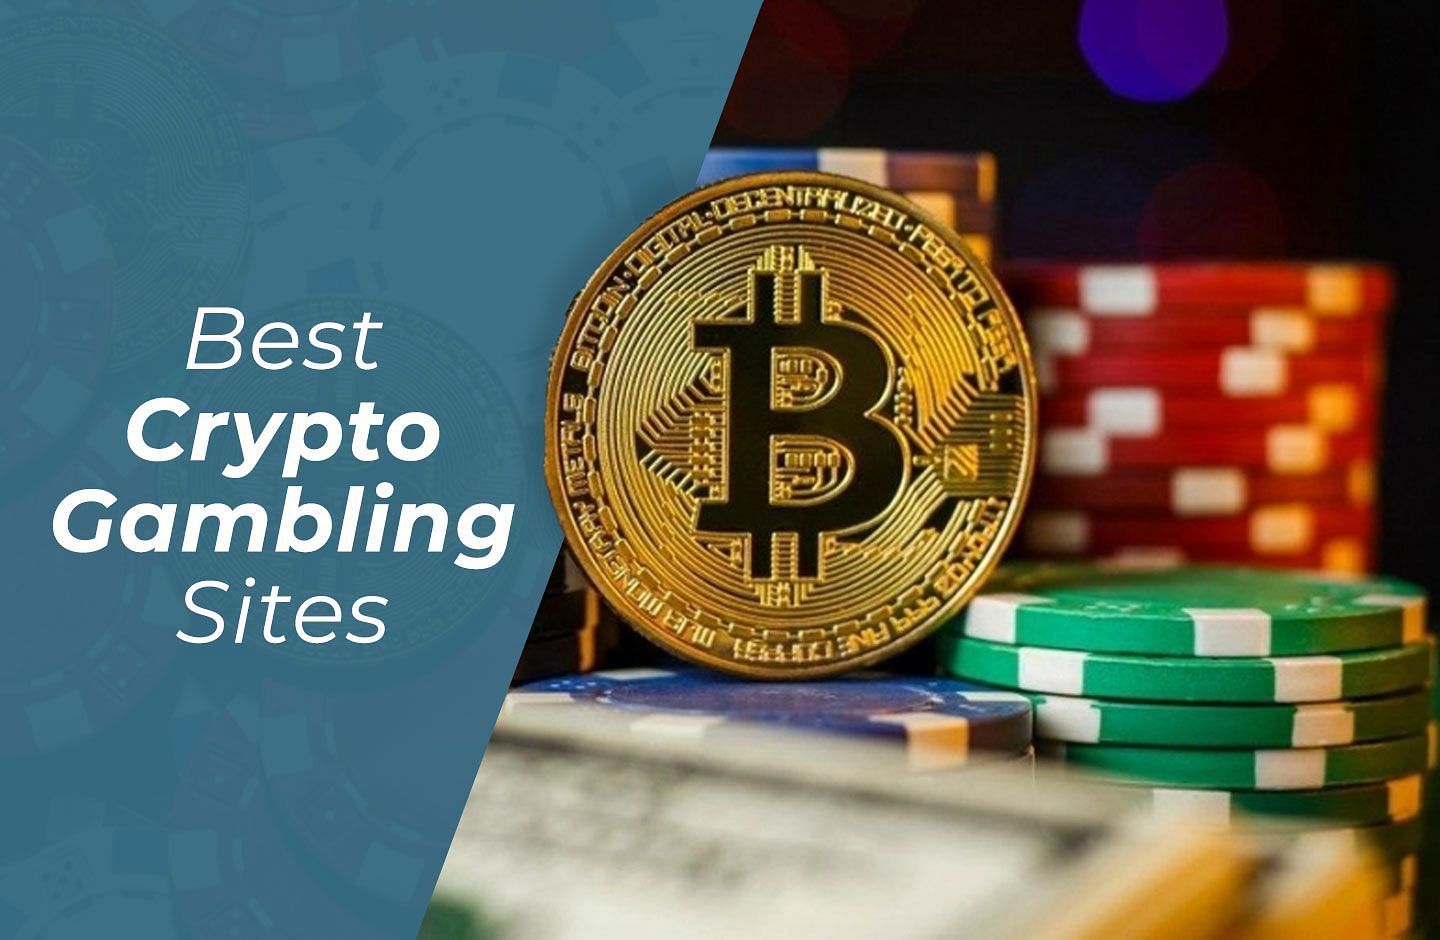 20 Places To Get Deals On 10 bitcoin casinos